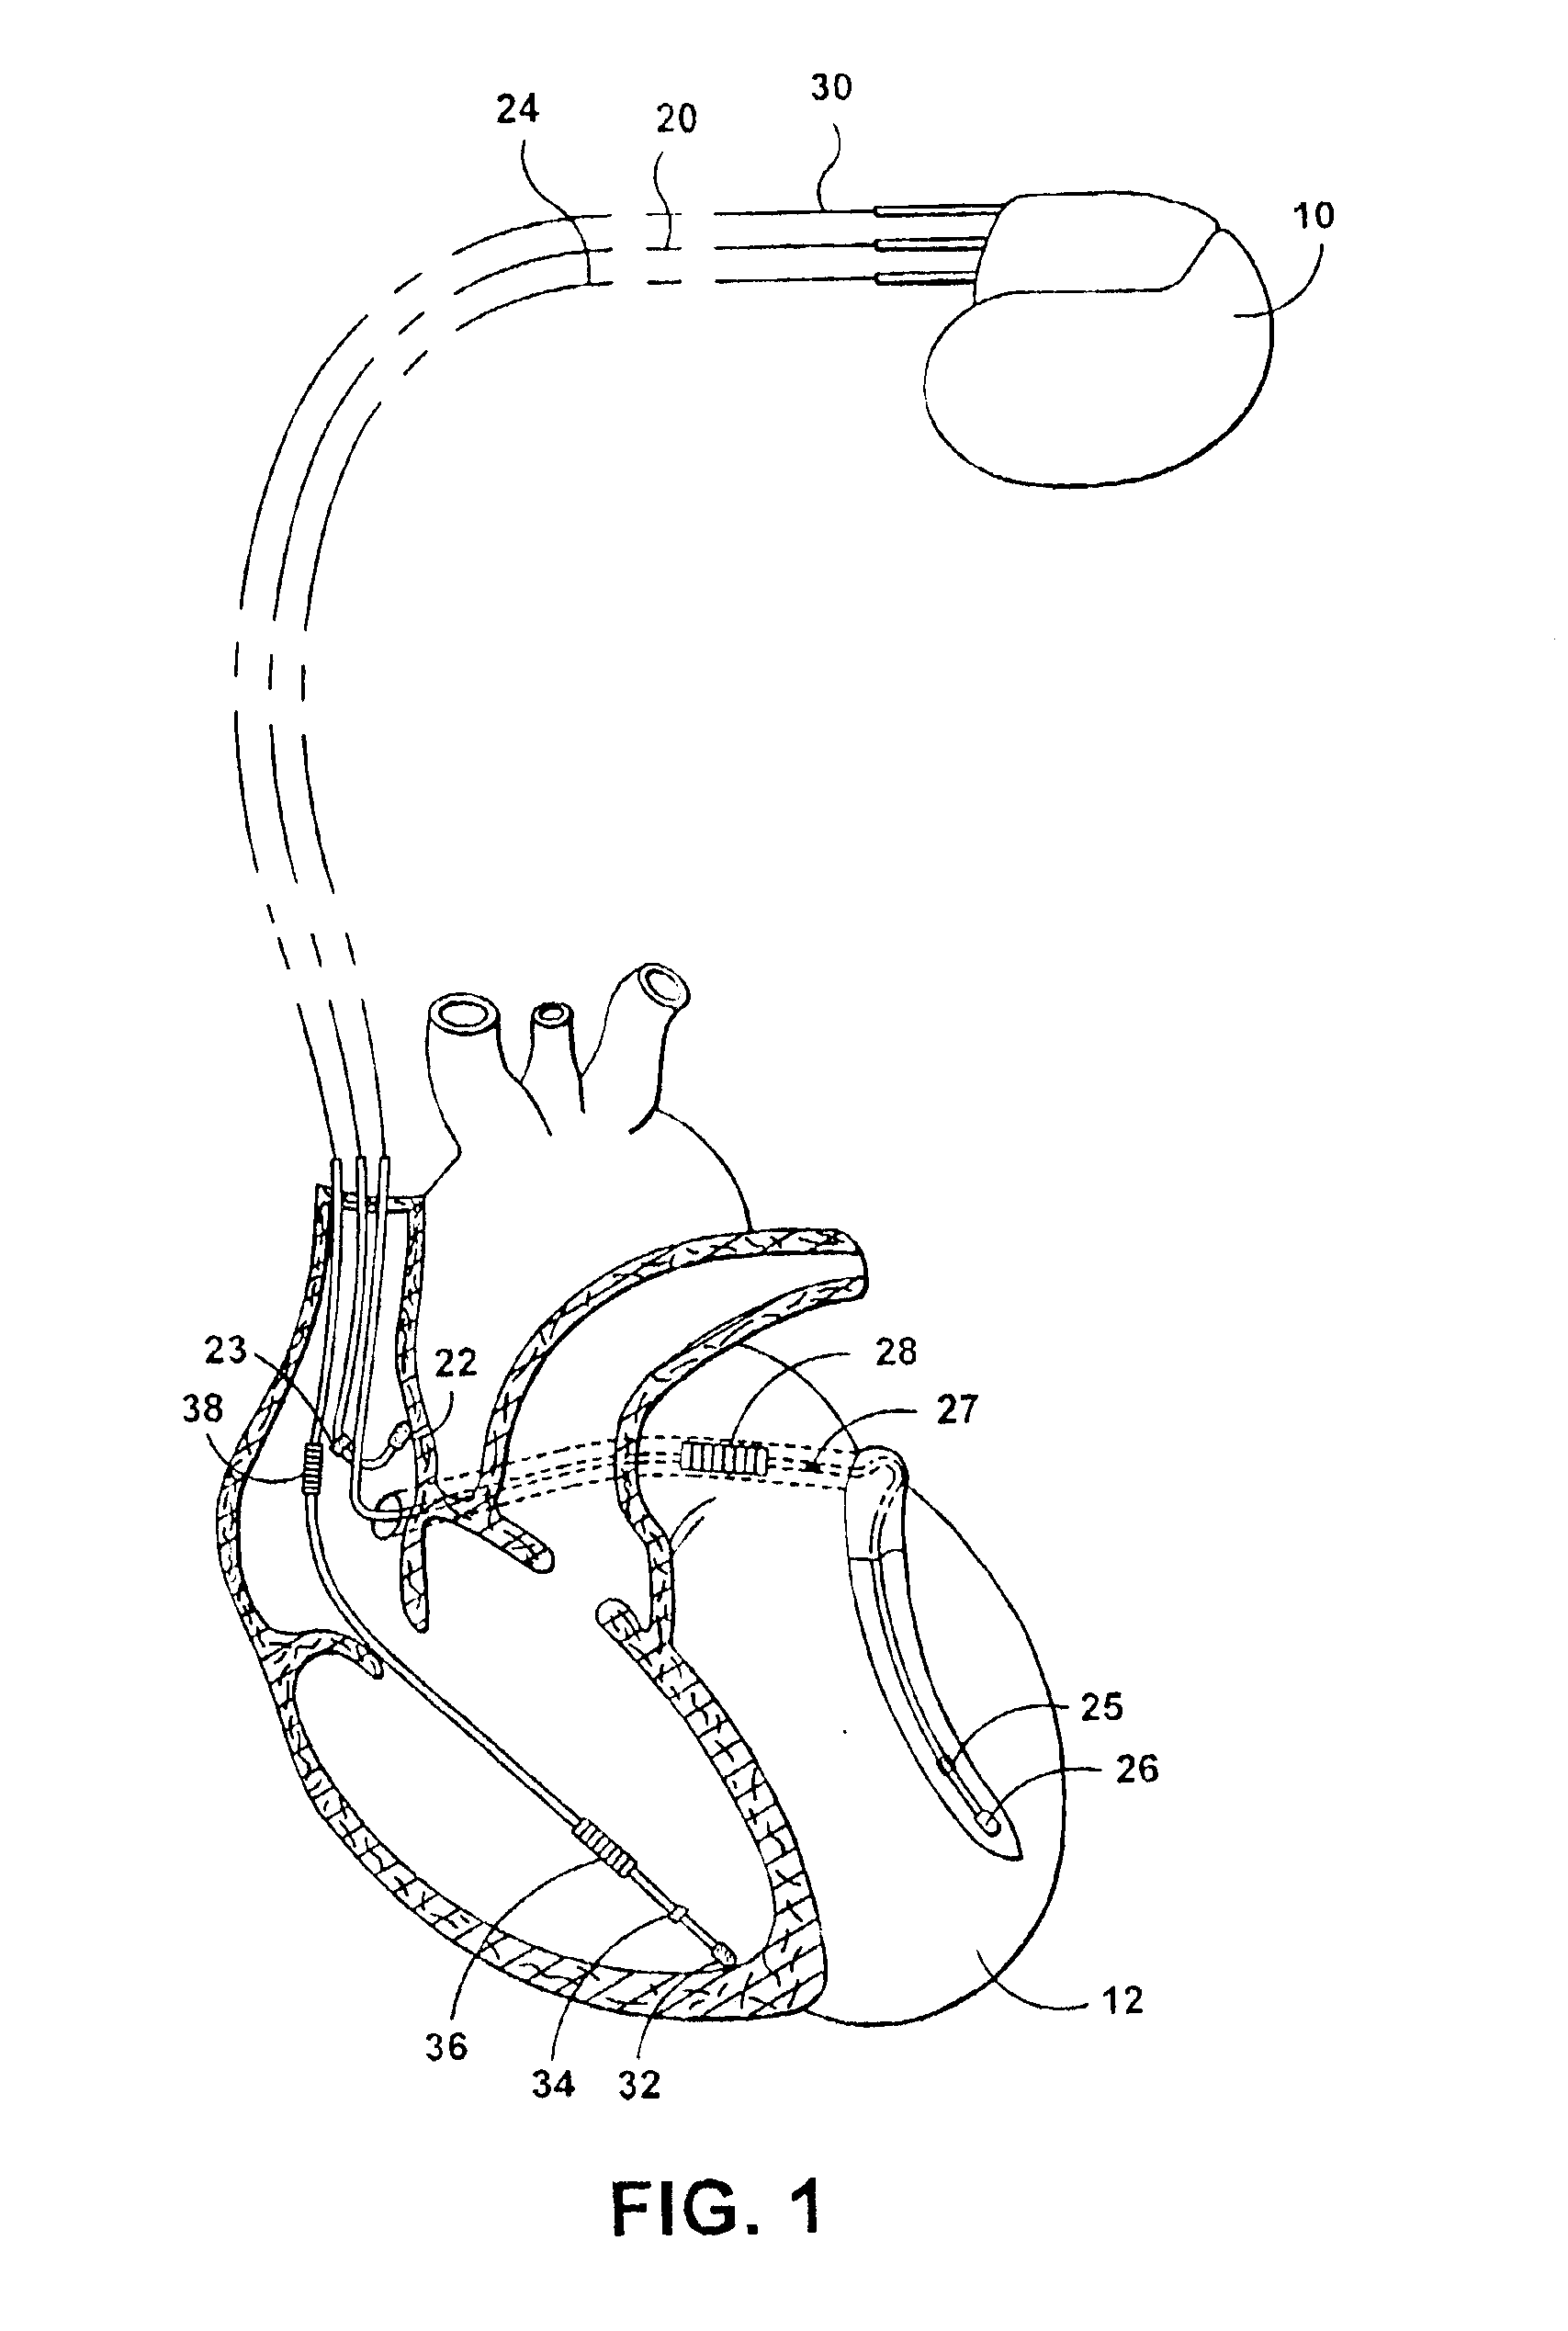 Multi-site cardiac stimulation device and method for detecting retrograde conduction